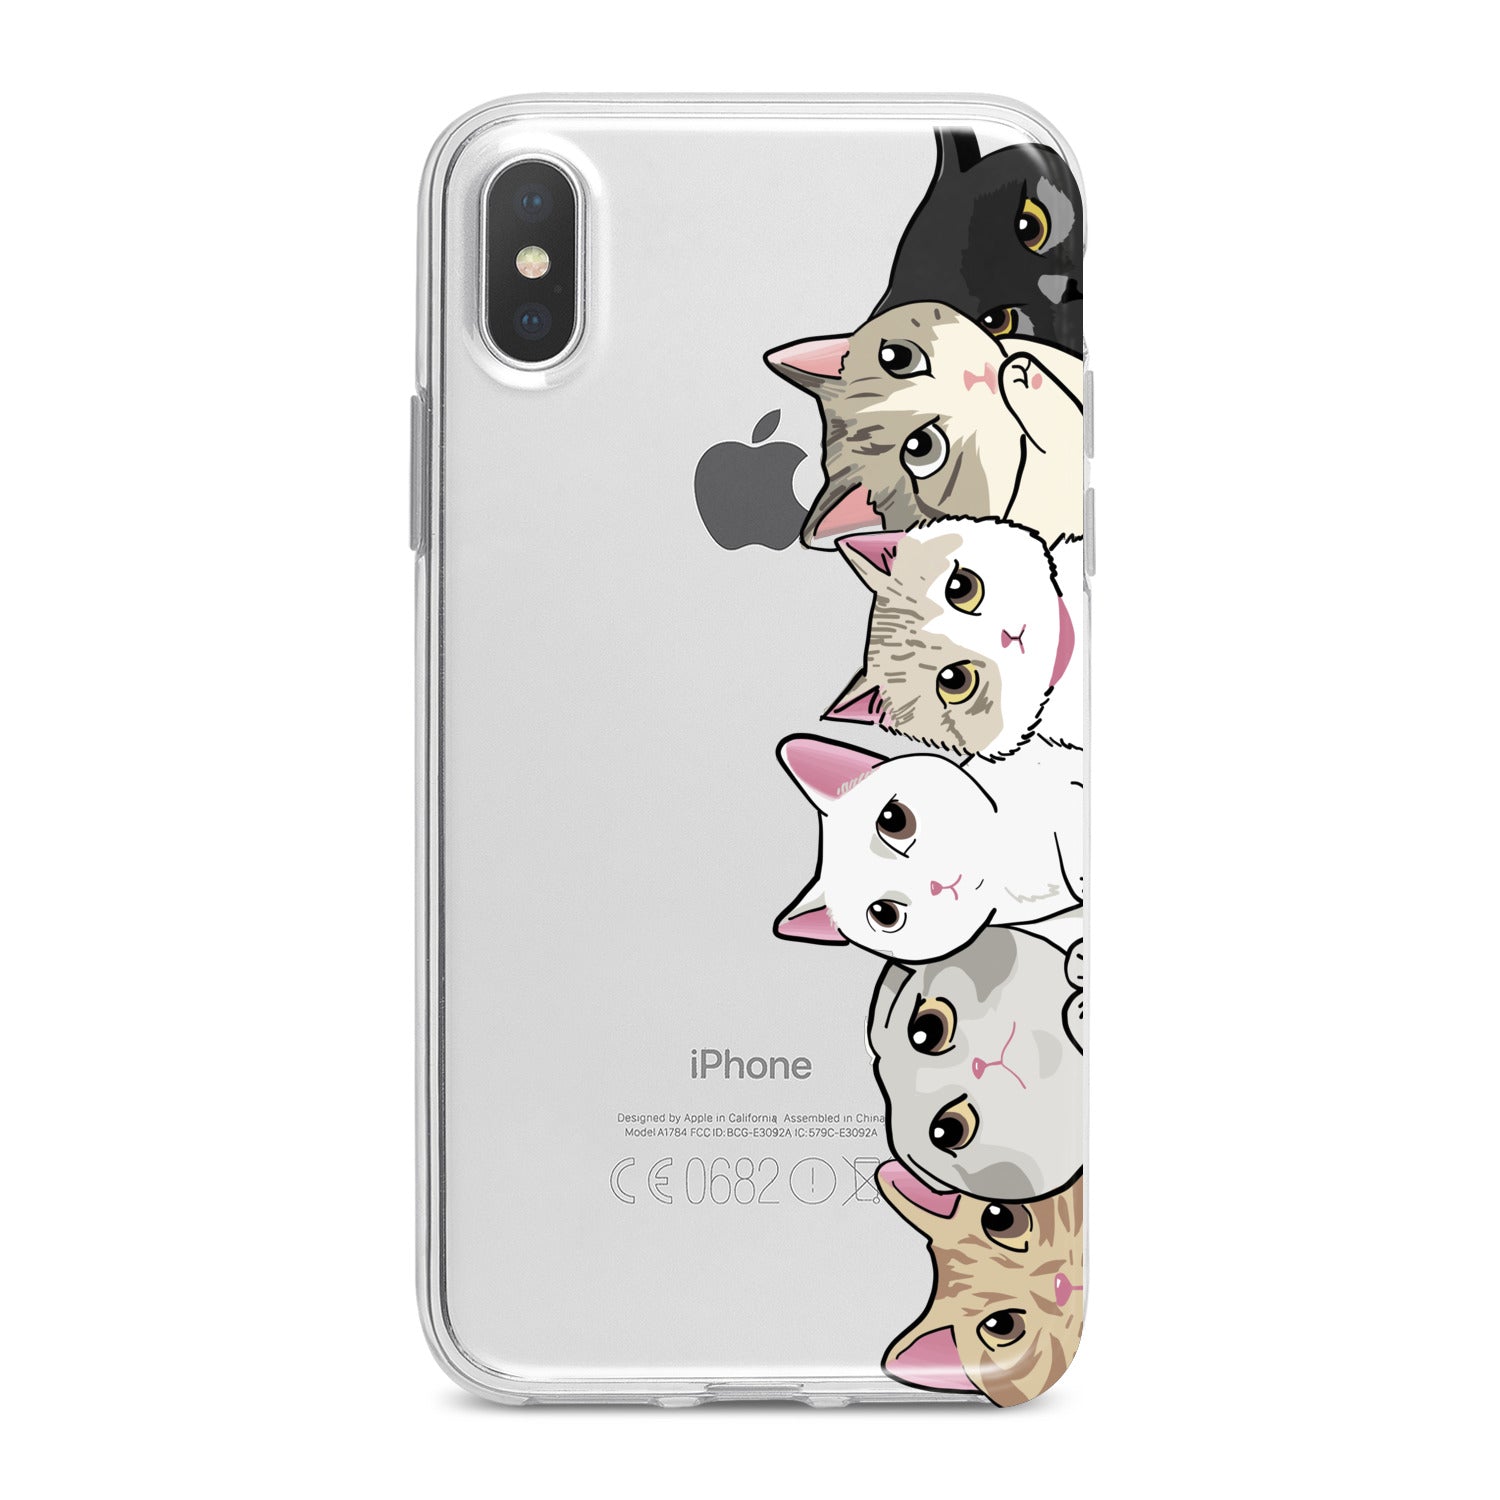 Lex Altern Right Cats Phone Case for your iPhone & Android phone.